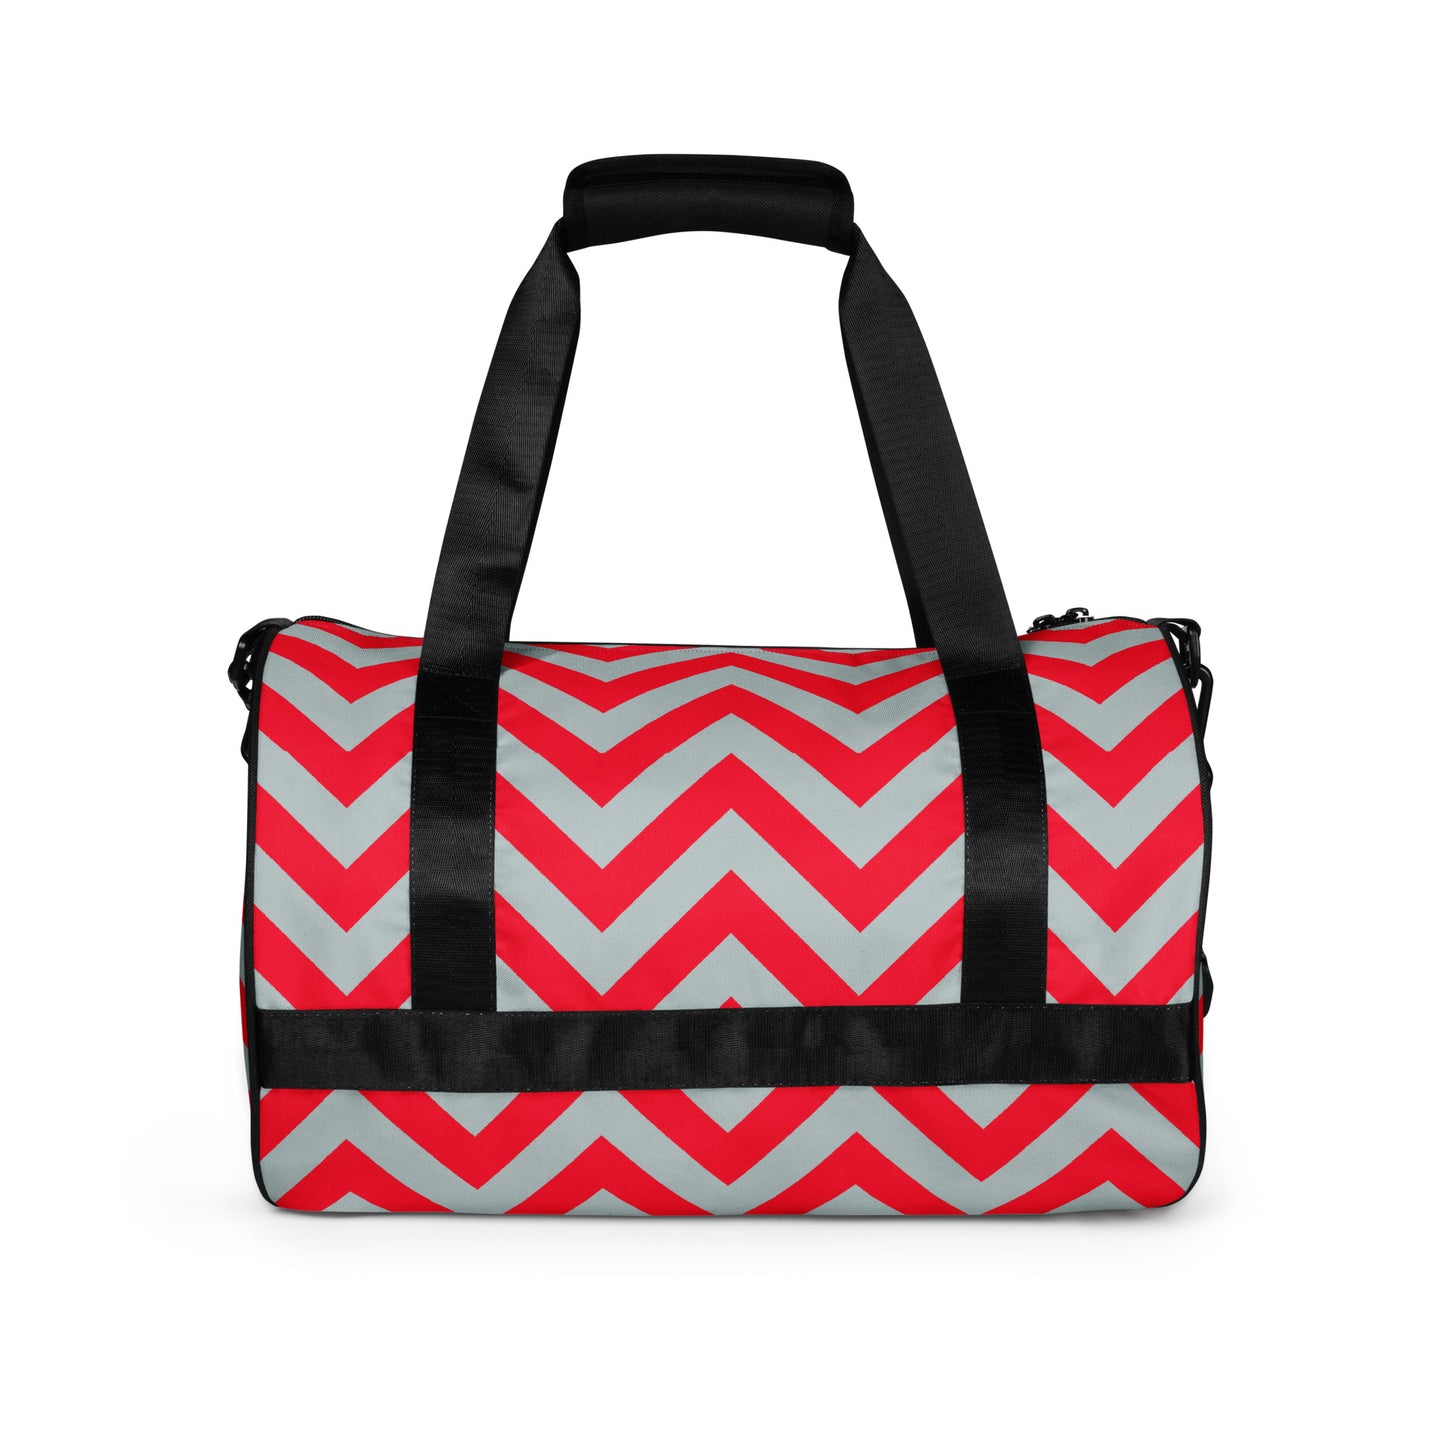 Zigzag - Inspired By Harry Styles - Sustainably Made gym bag